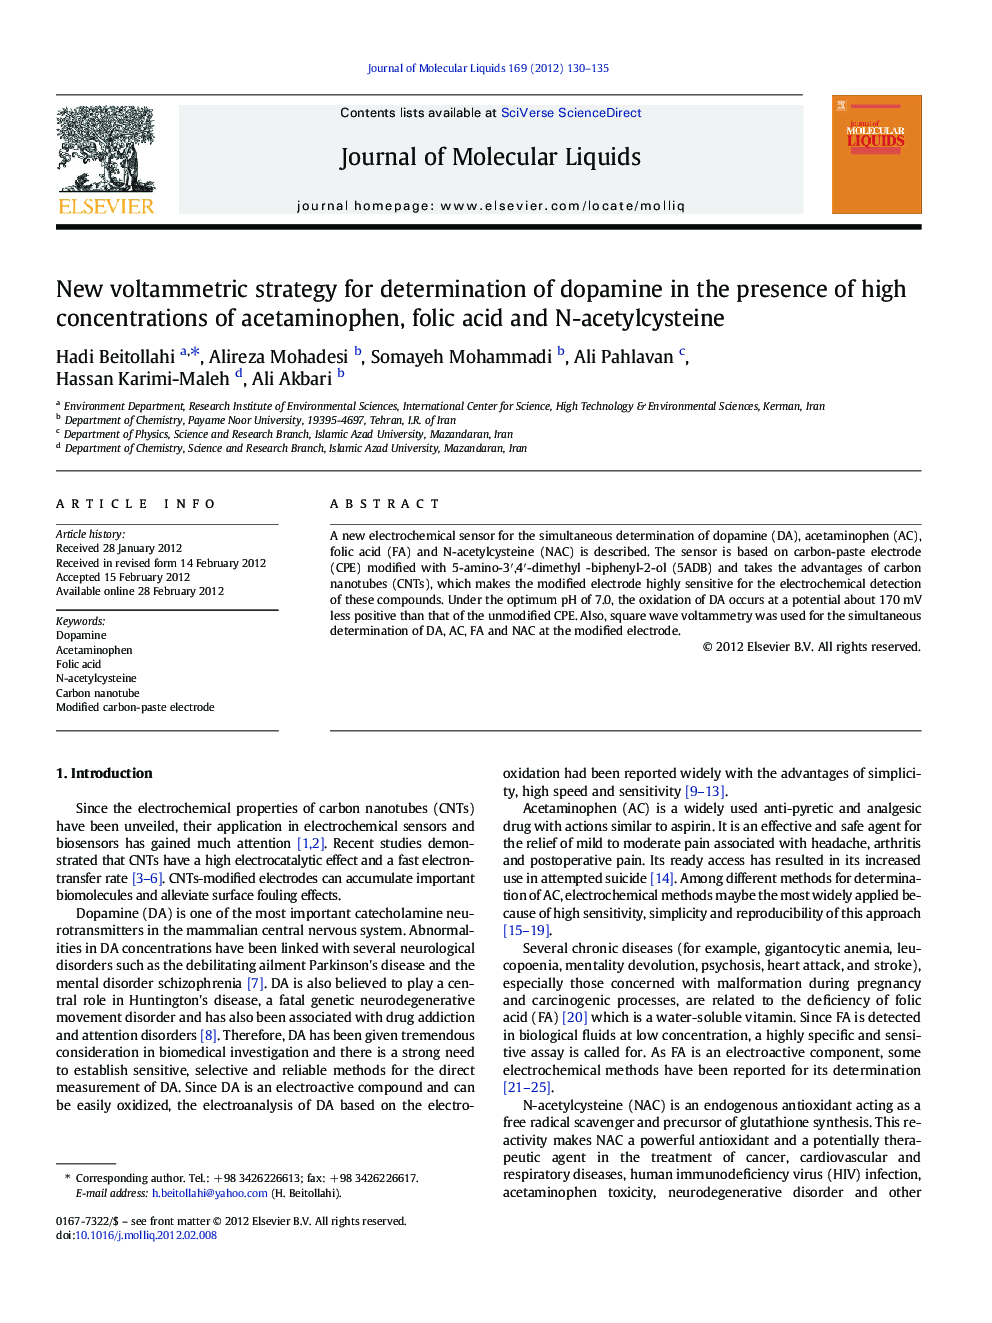 New voltammetric strategy for determination of dopamine in the presence of high concentrations of acetaminophen, folic acid and N-acetylcysteine